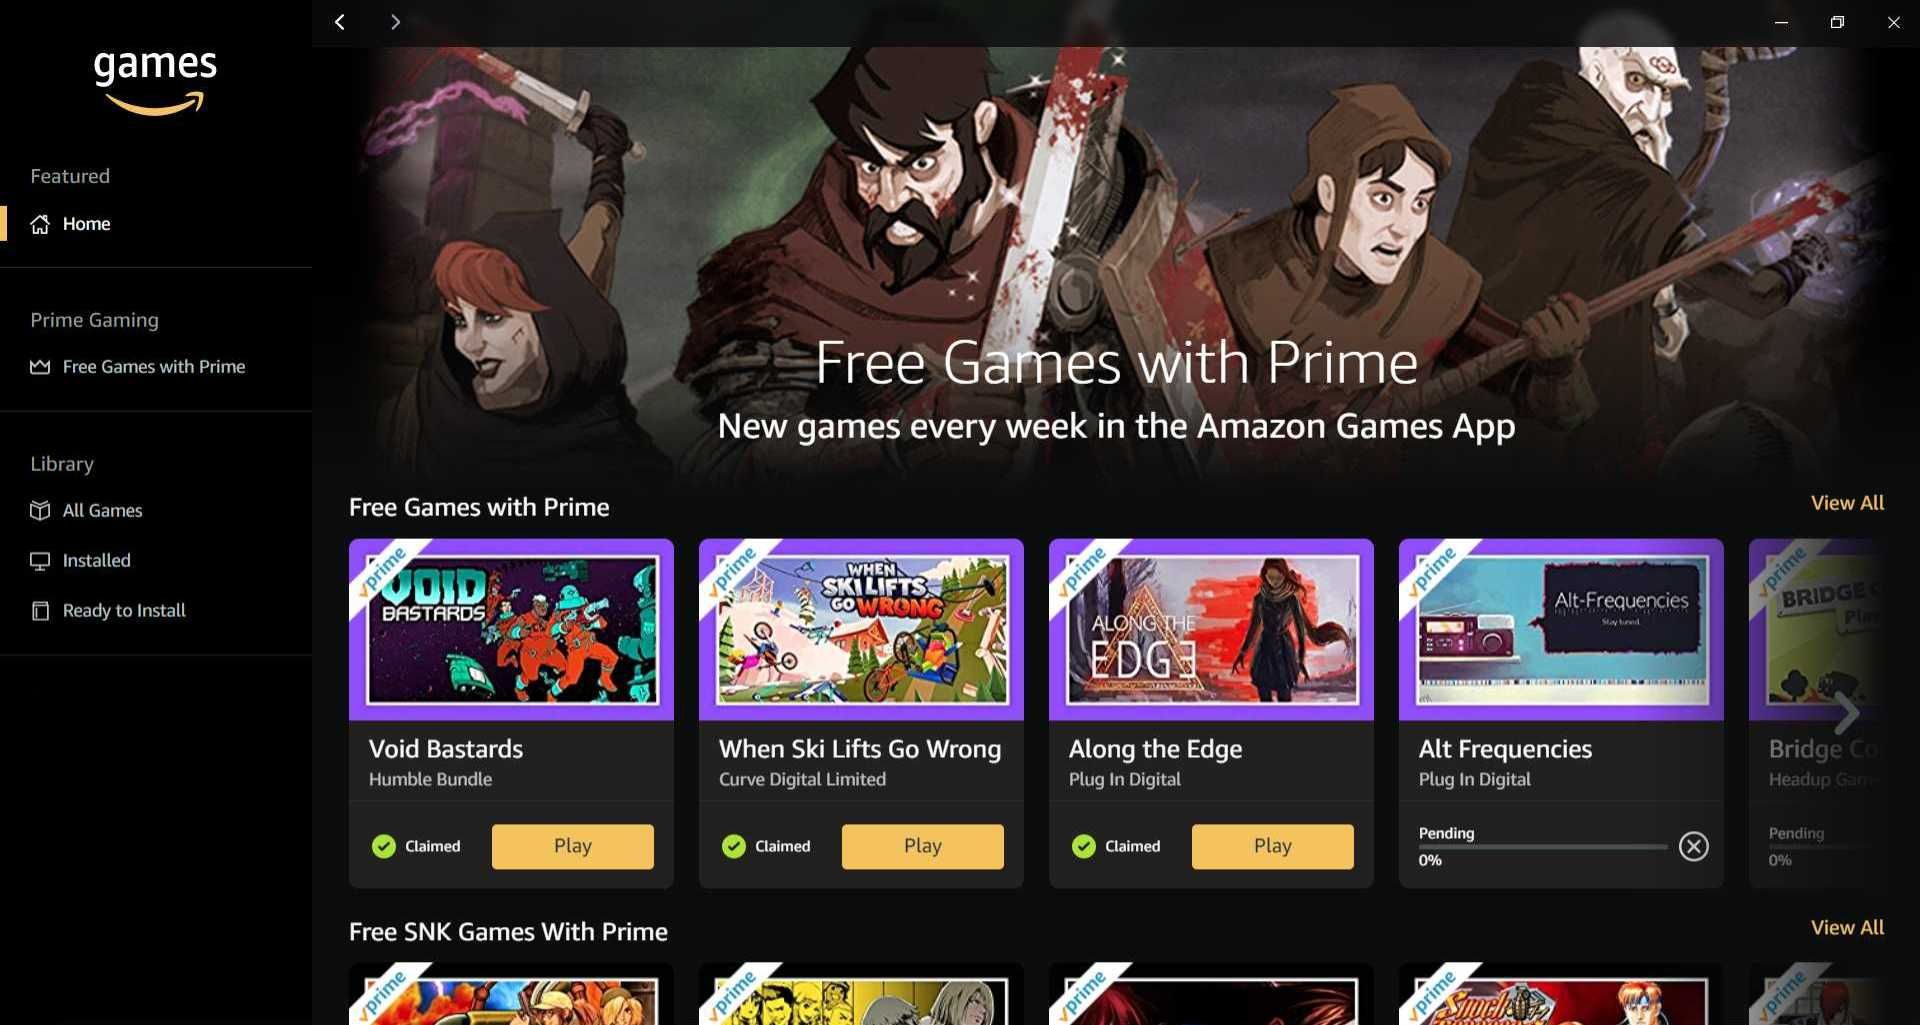 Free Games With Amazon Games For Amazon Prime Members